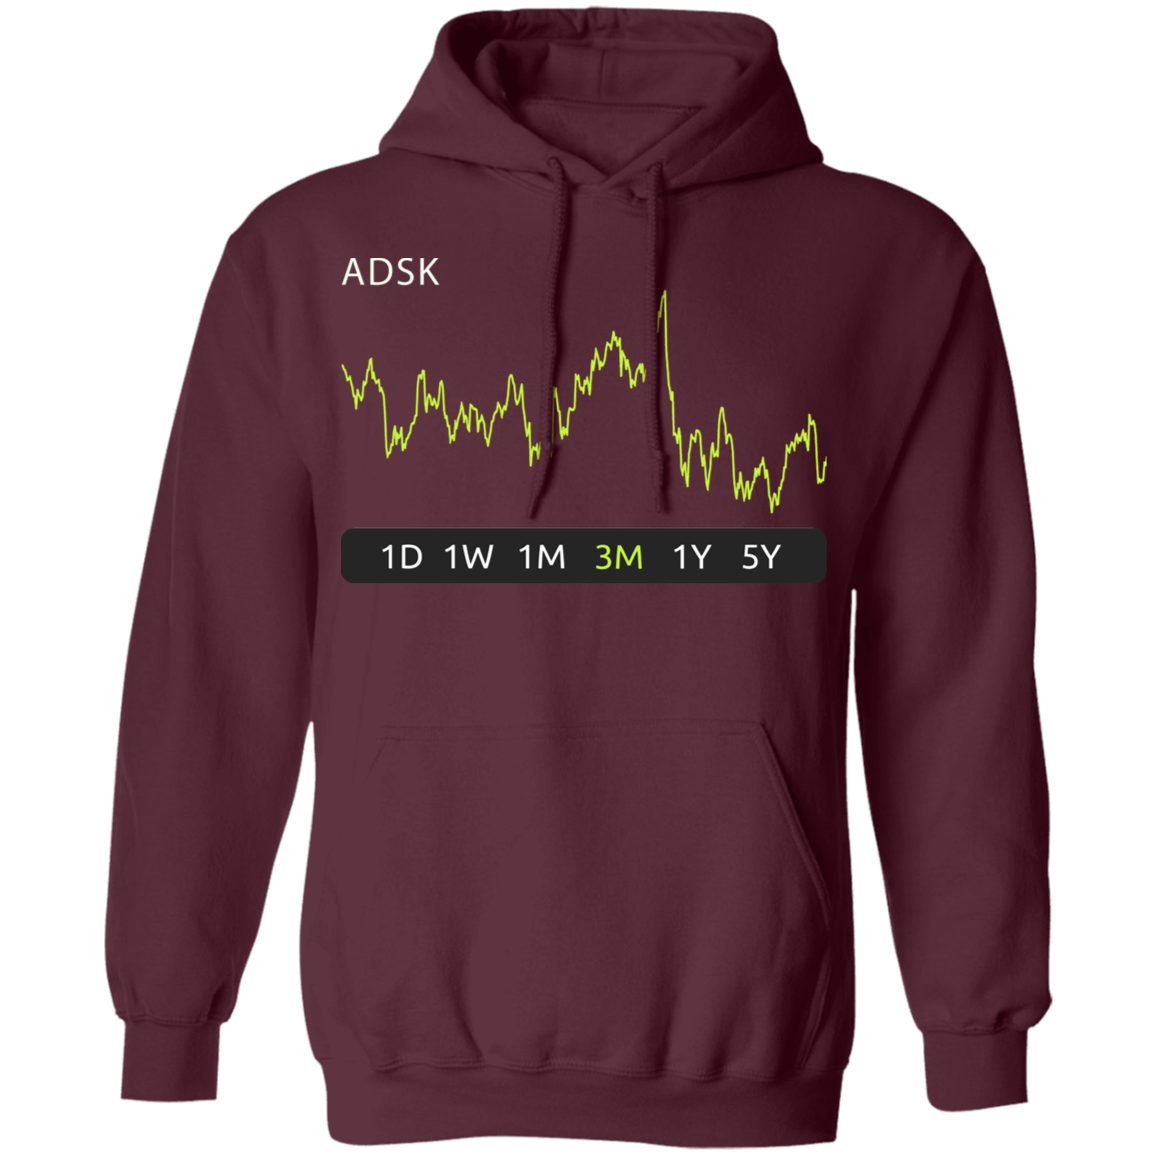 ADSK Stock 3m Pullover Hoodie